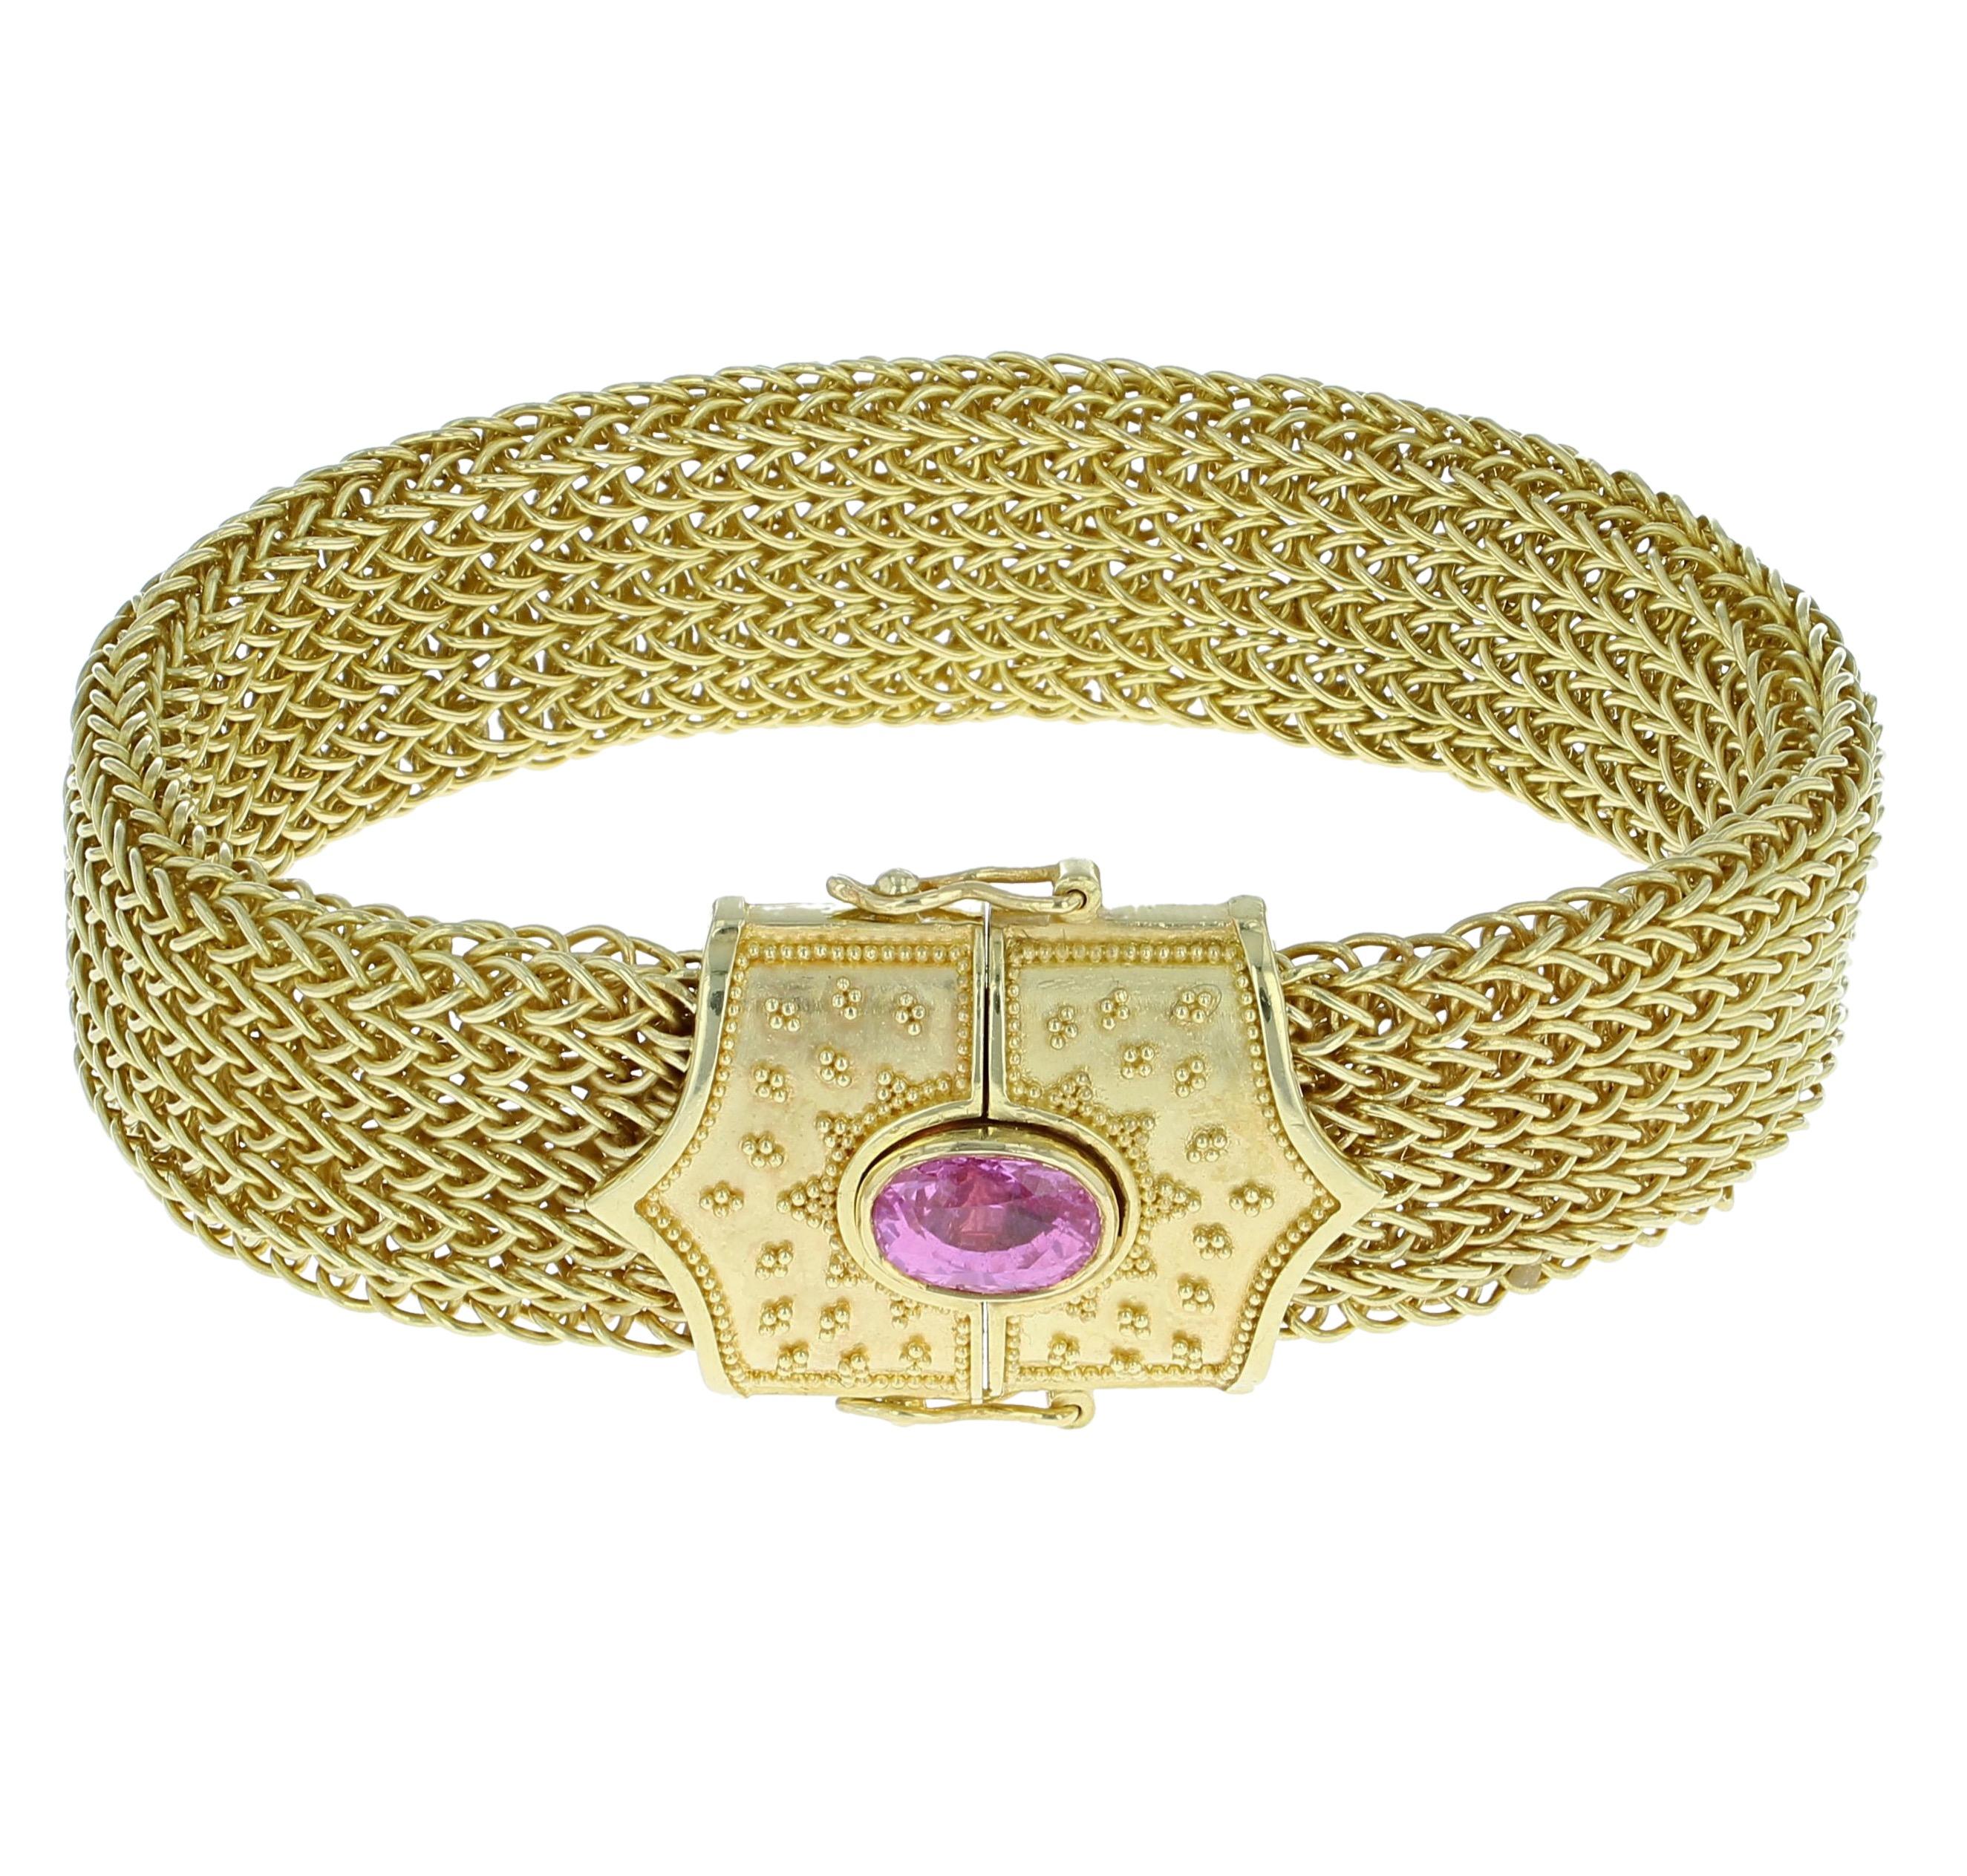 Kent Raible 18 Karat Gold Pink Sapphire Woven Chain Bracelet with Granulation In New Condition For Sale In Mossrock, WA